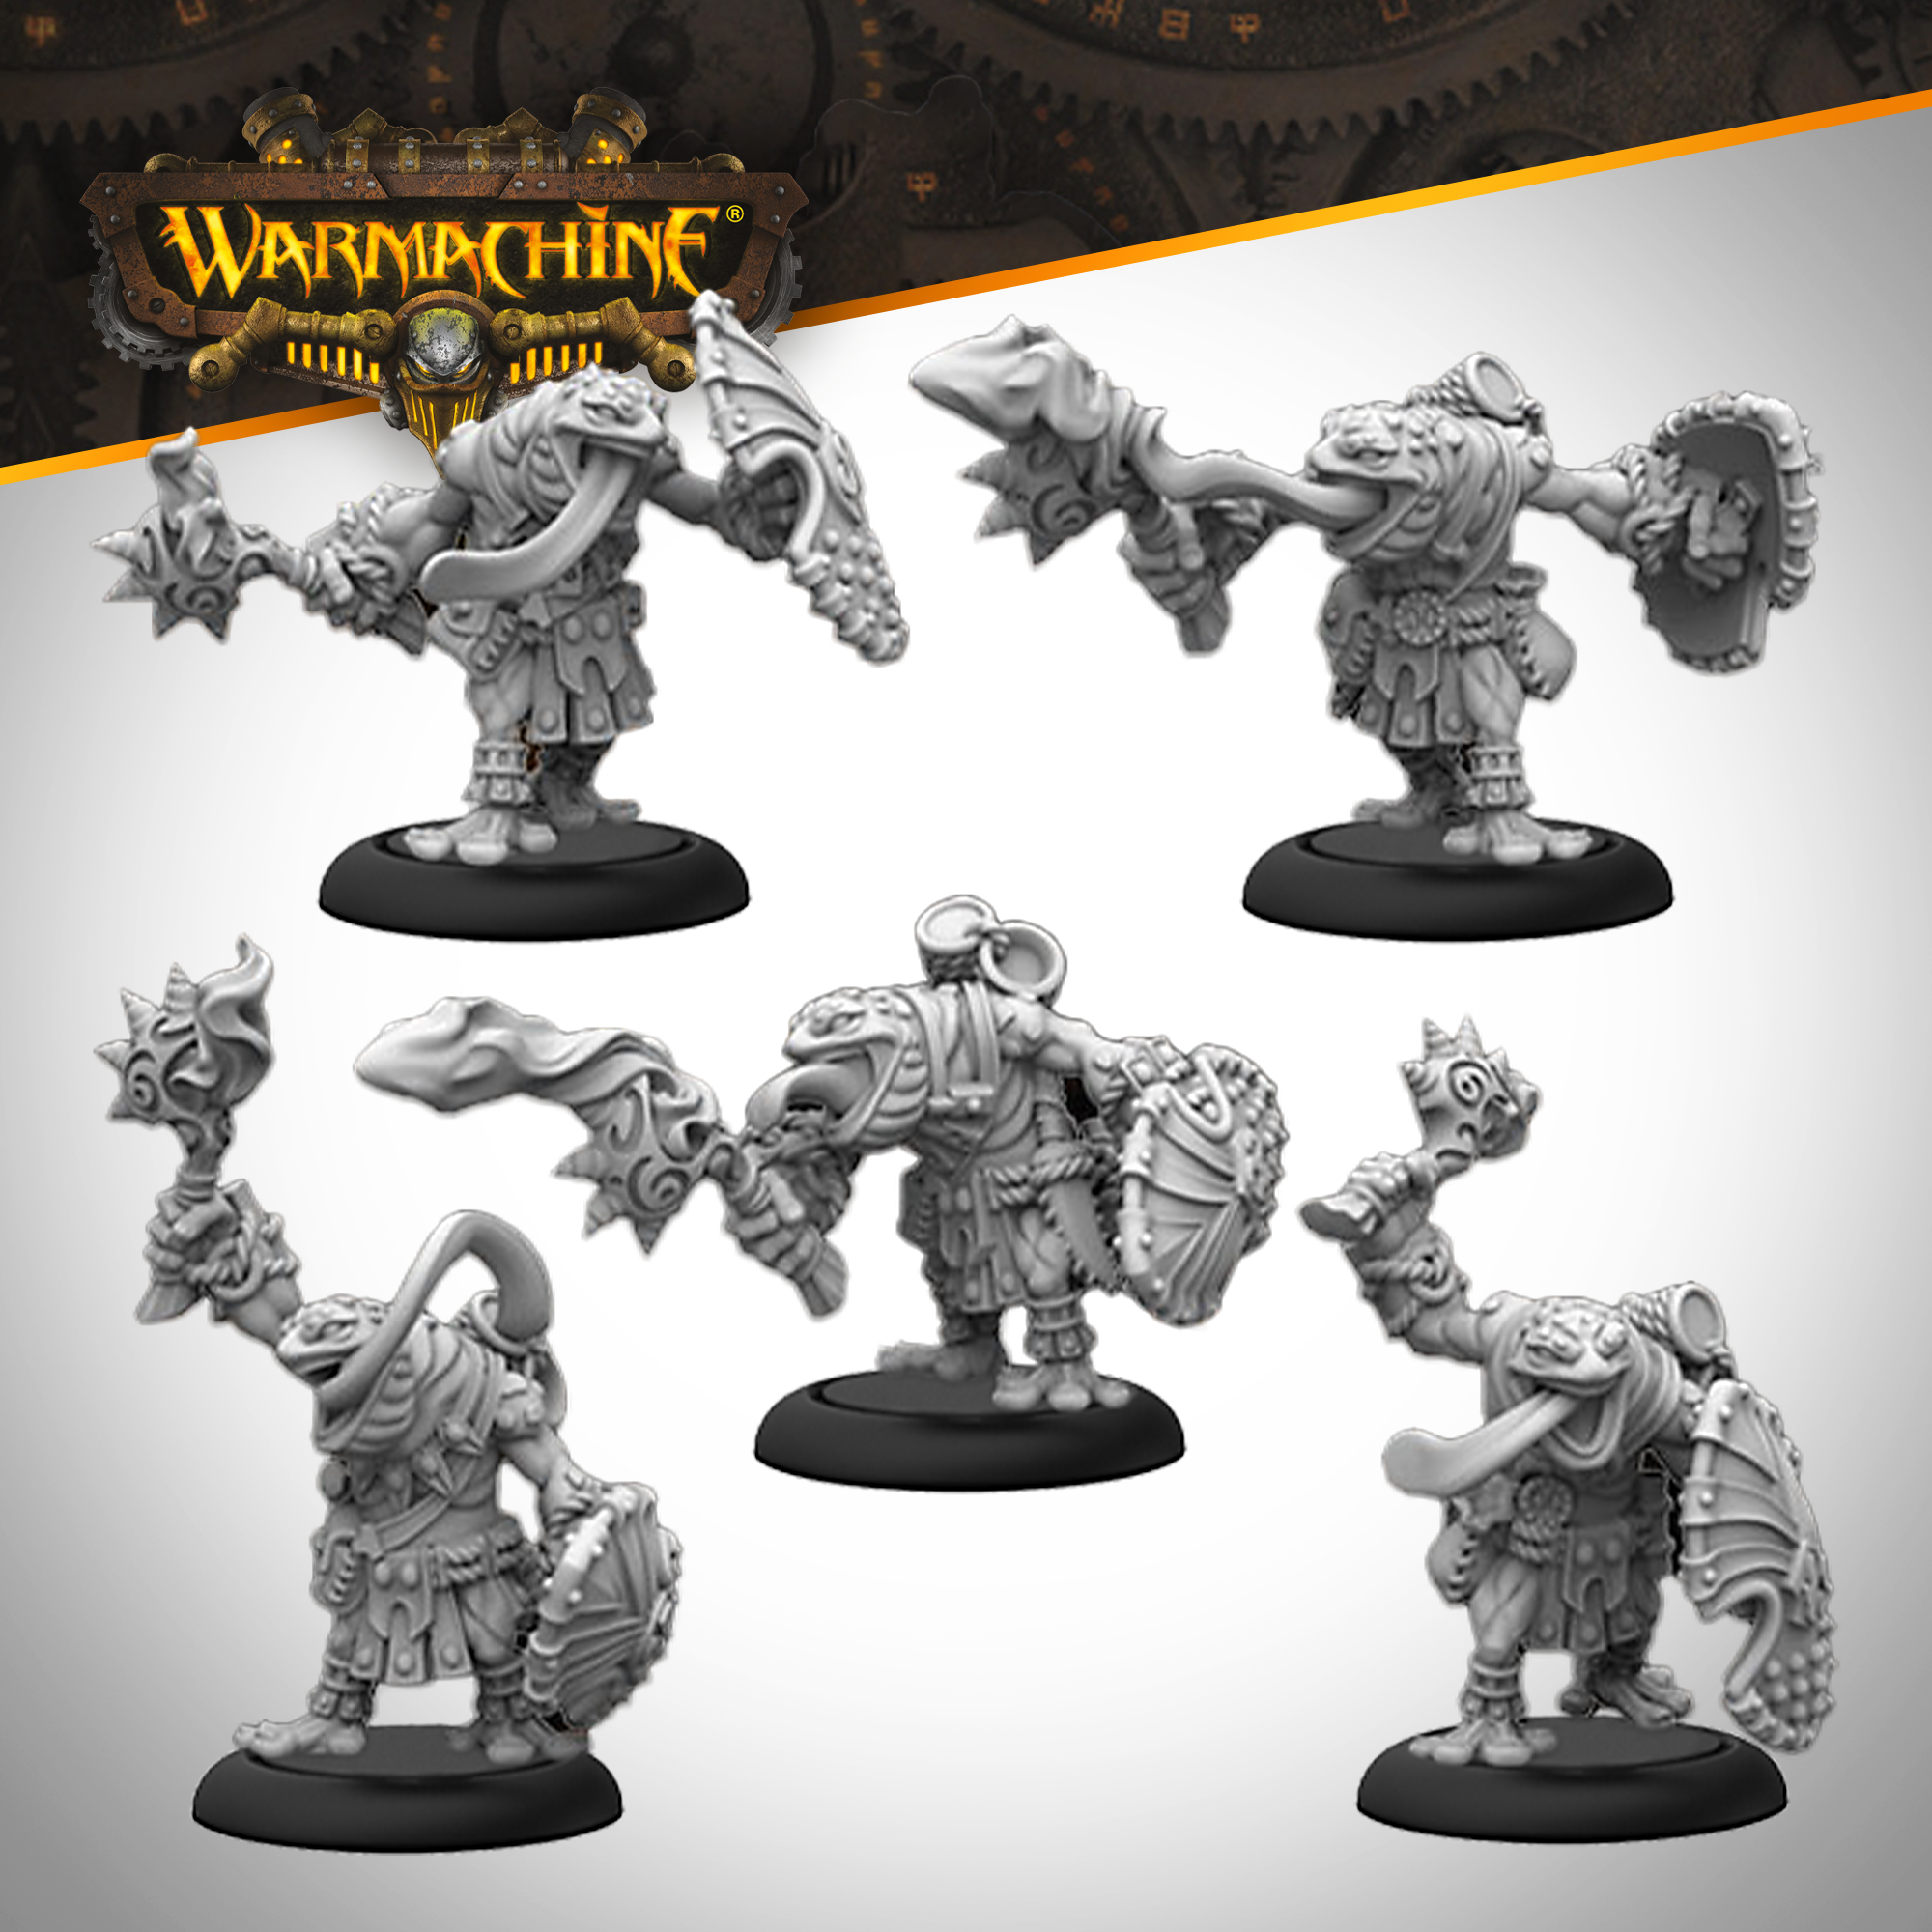 Warmachine: Fire Spitters